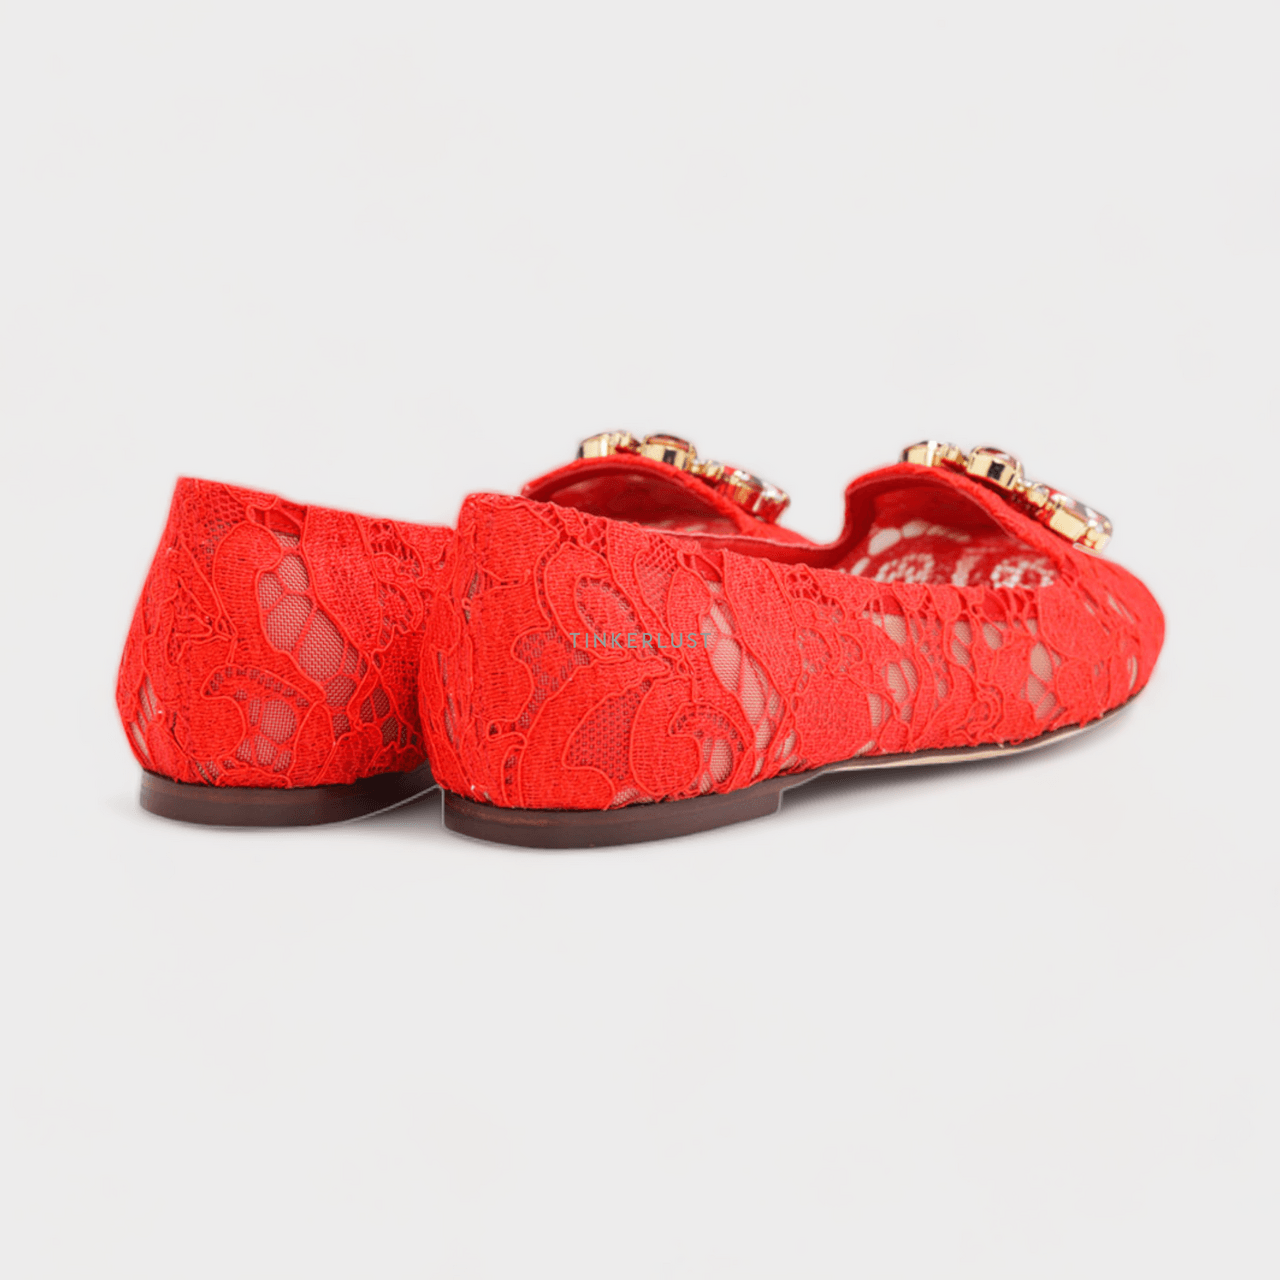 DOLCE & GABBANA Vally Slippers in Red